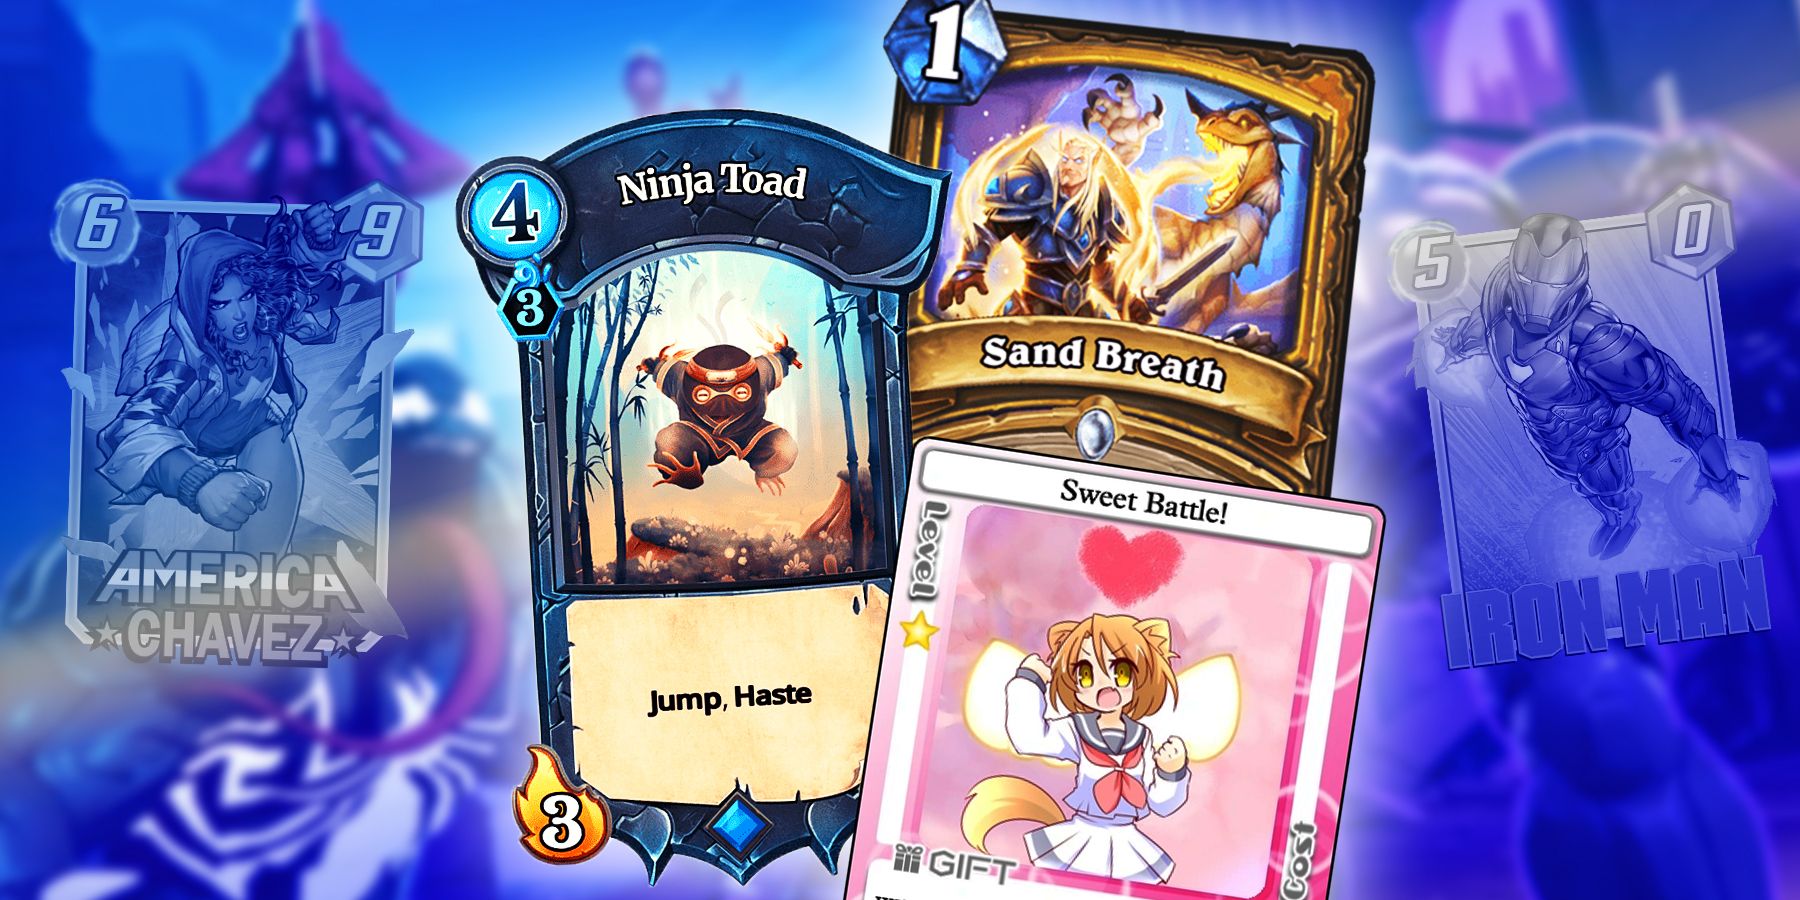 A Ninja Toad card from game Faeria, a Sand Breath card from Hearthstone and a Sweet Battle! card from game 100% Orange Juice 